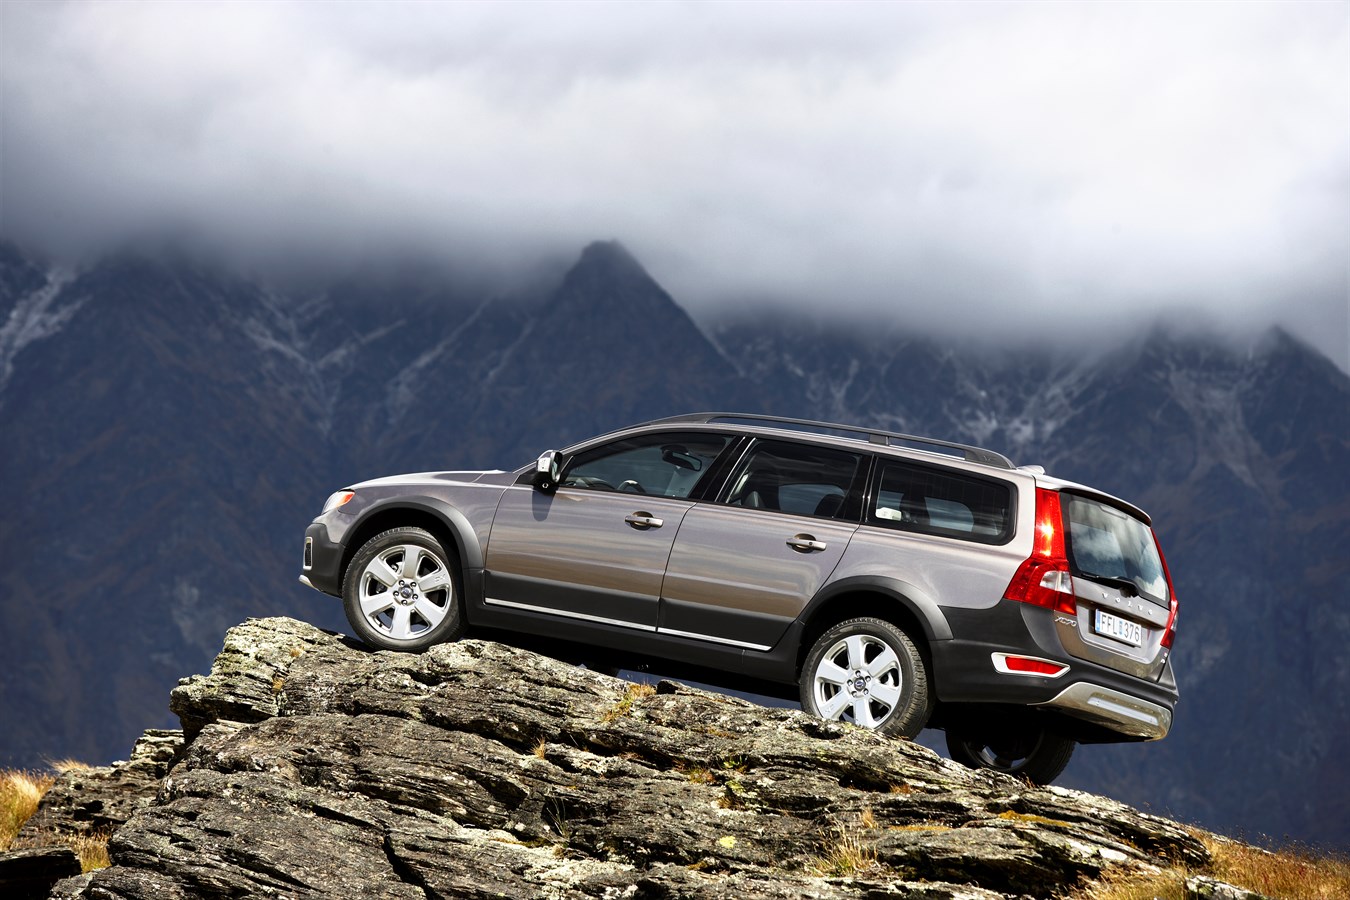 All-new Volvo XC70